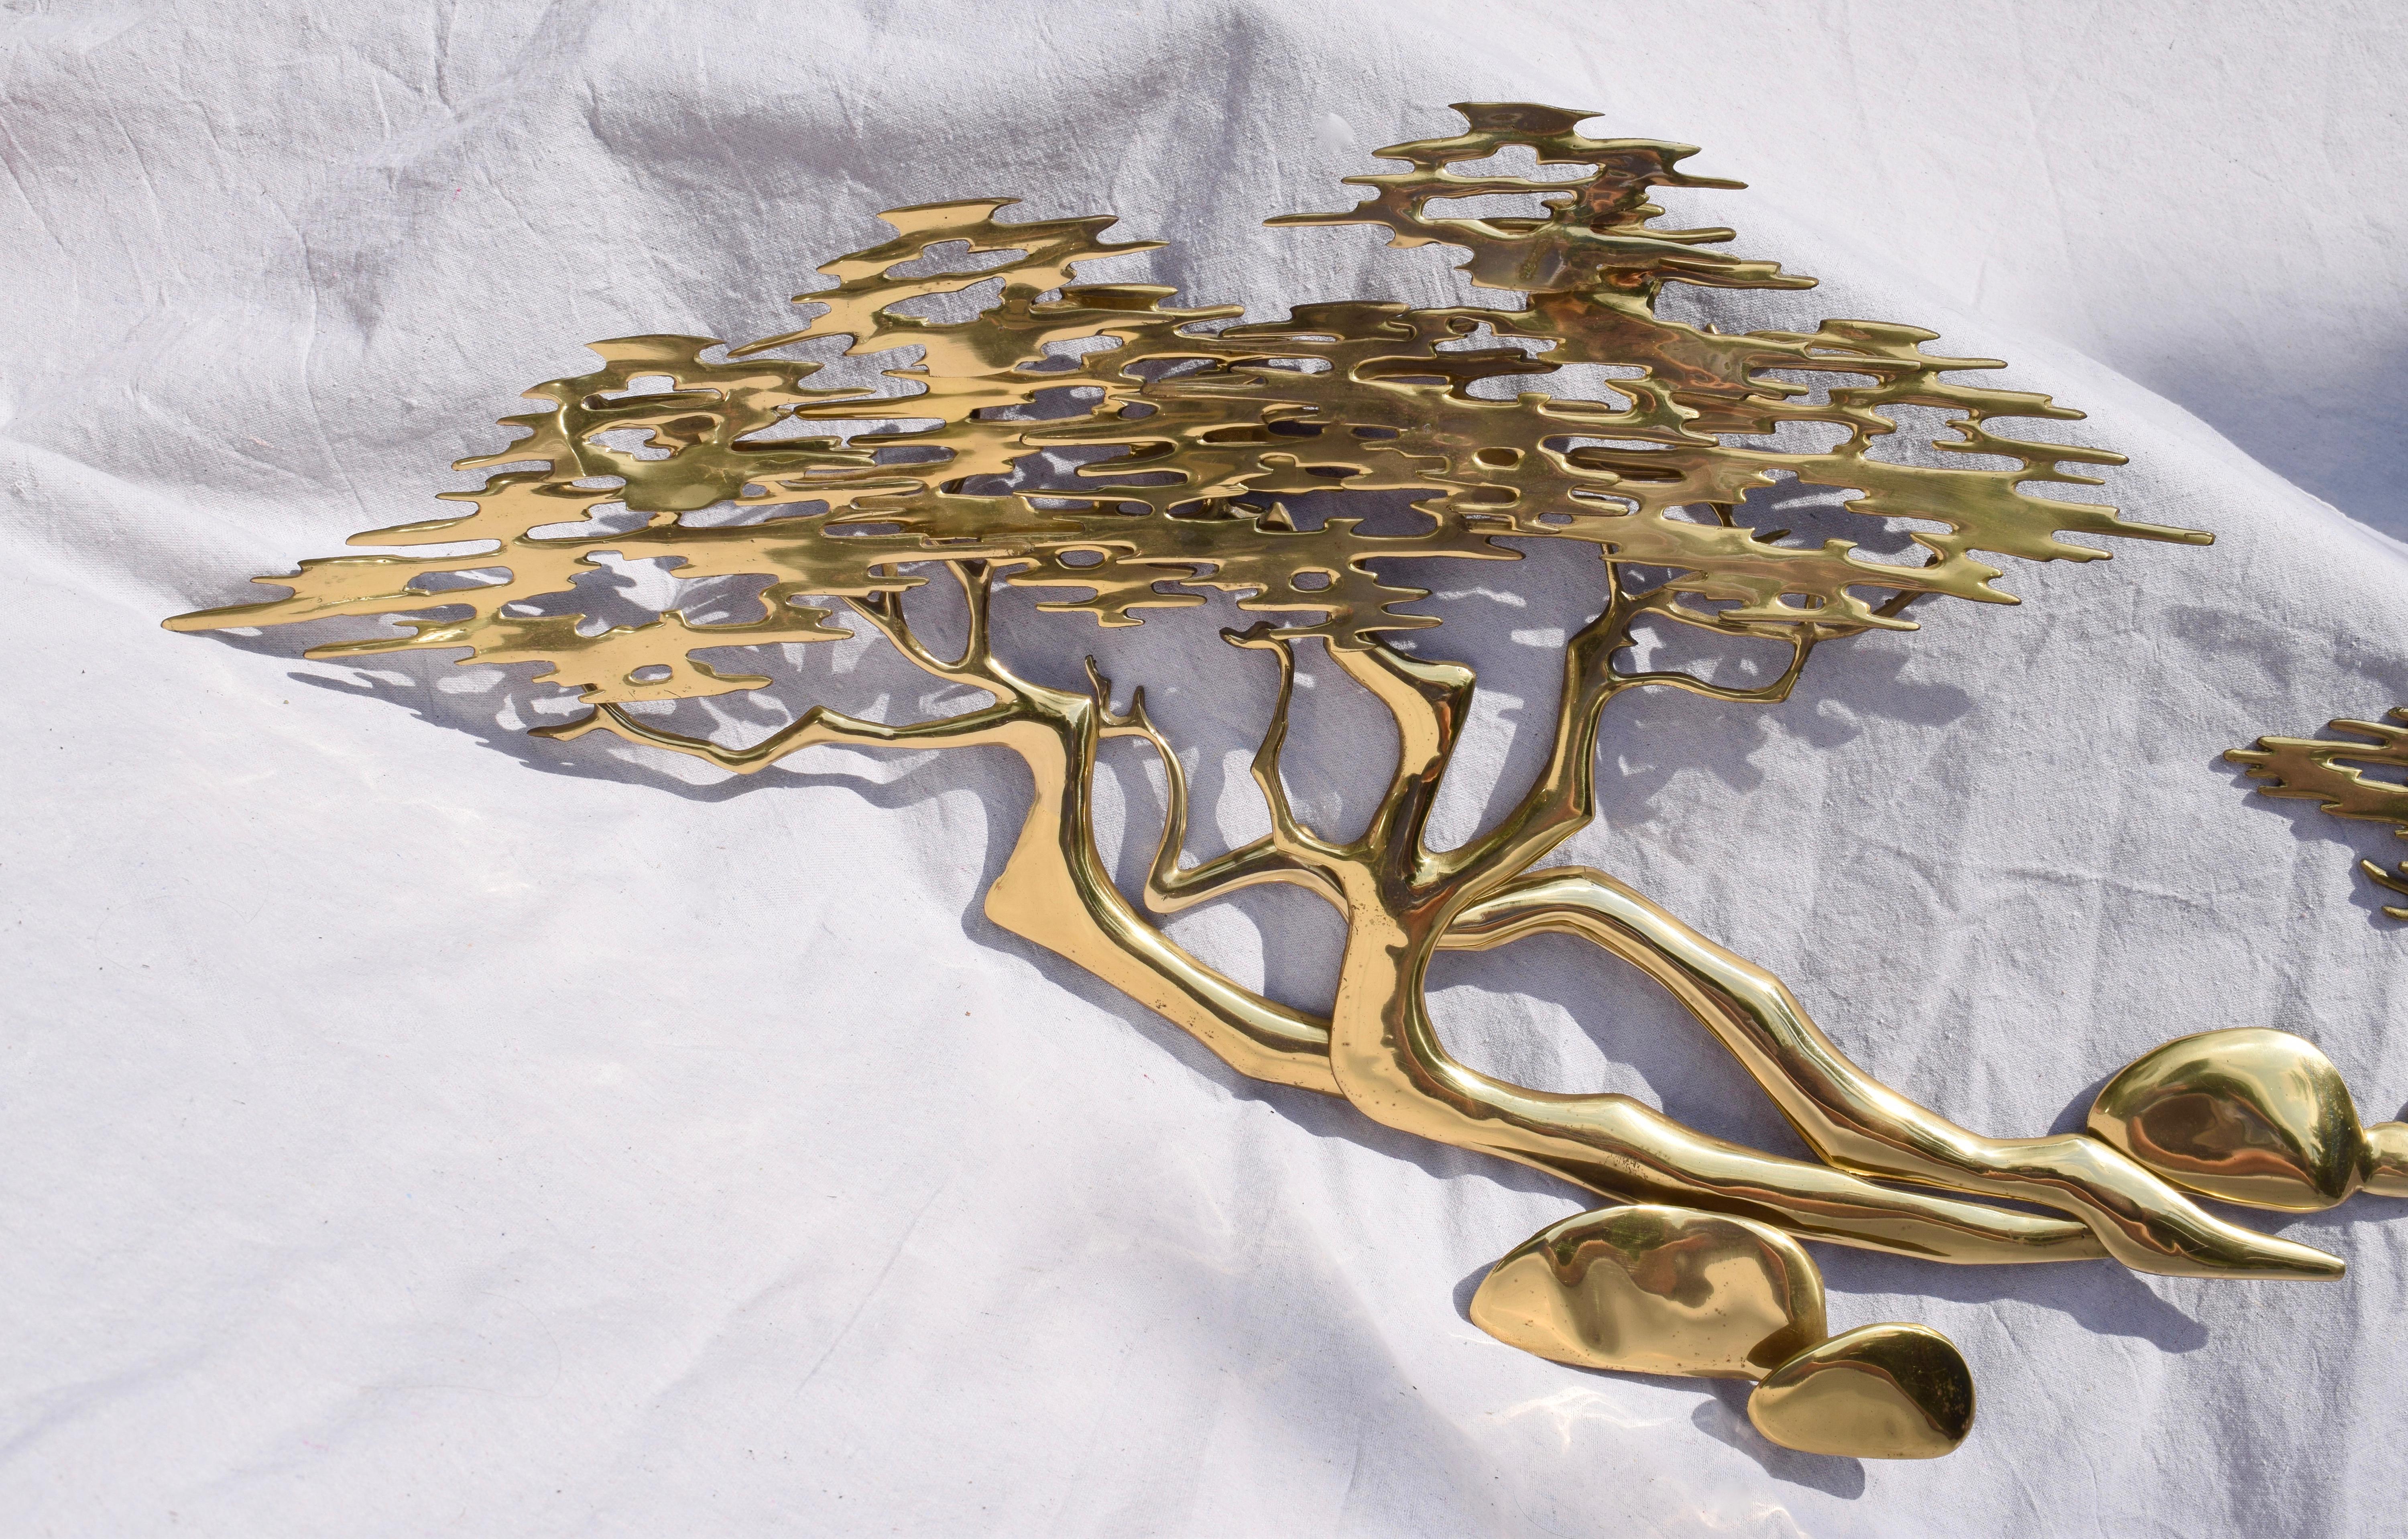 Striking brass wall sculpture design of Monterey's beloved lone cypress tree in Pebble Beach, California.
Clearly branded Bijon signature & date of 1980.